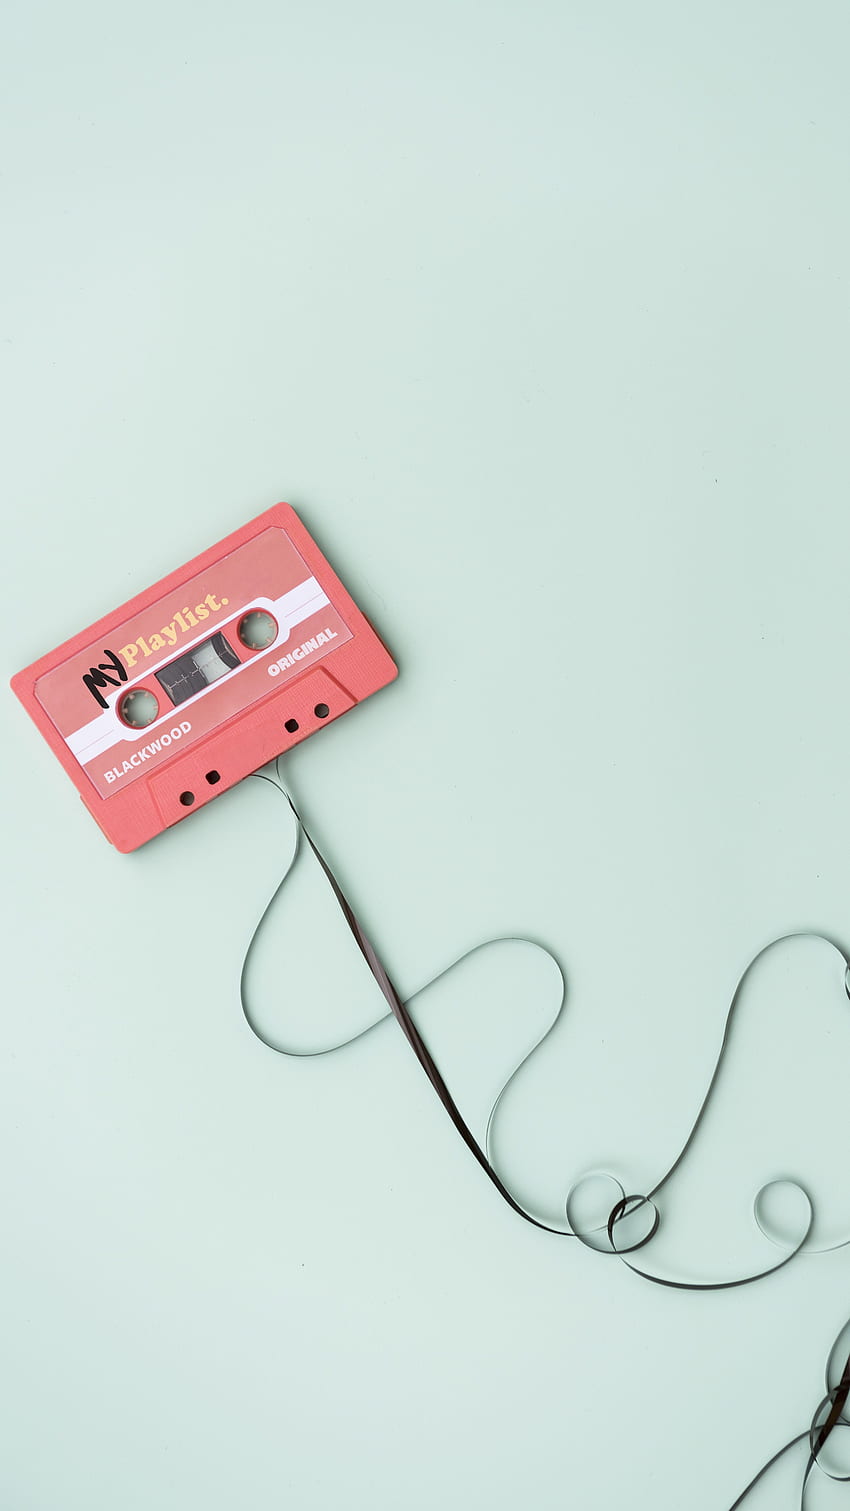 A cassette tape with wires attached to it - Music